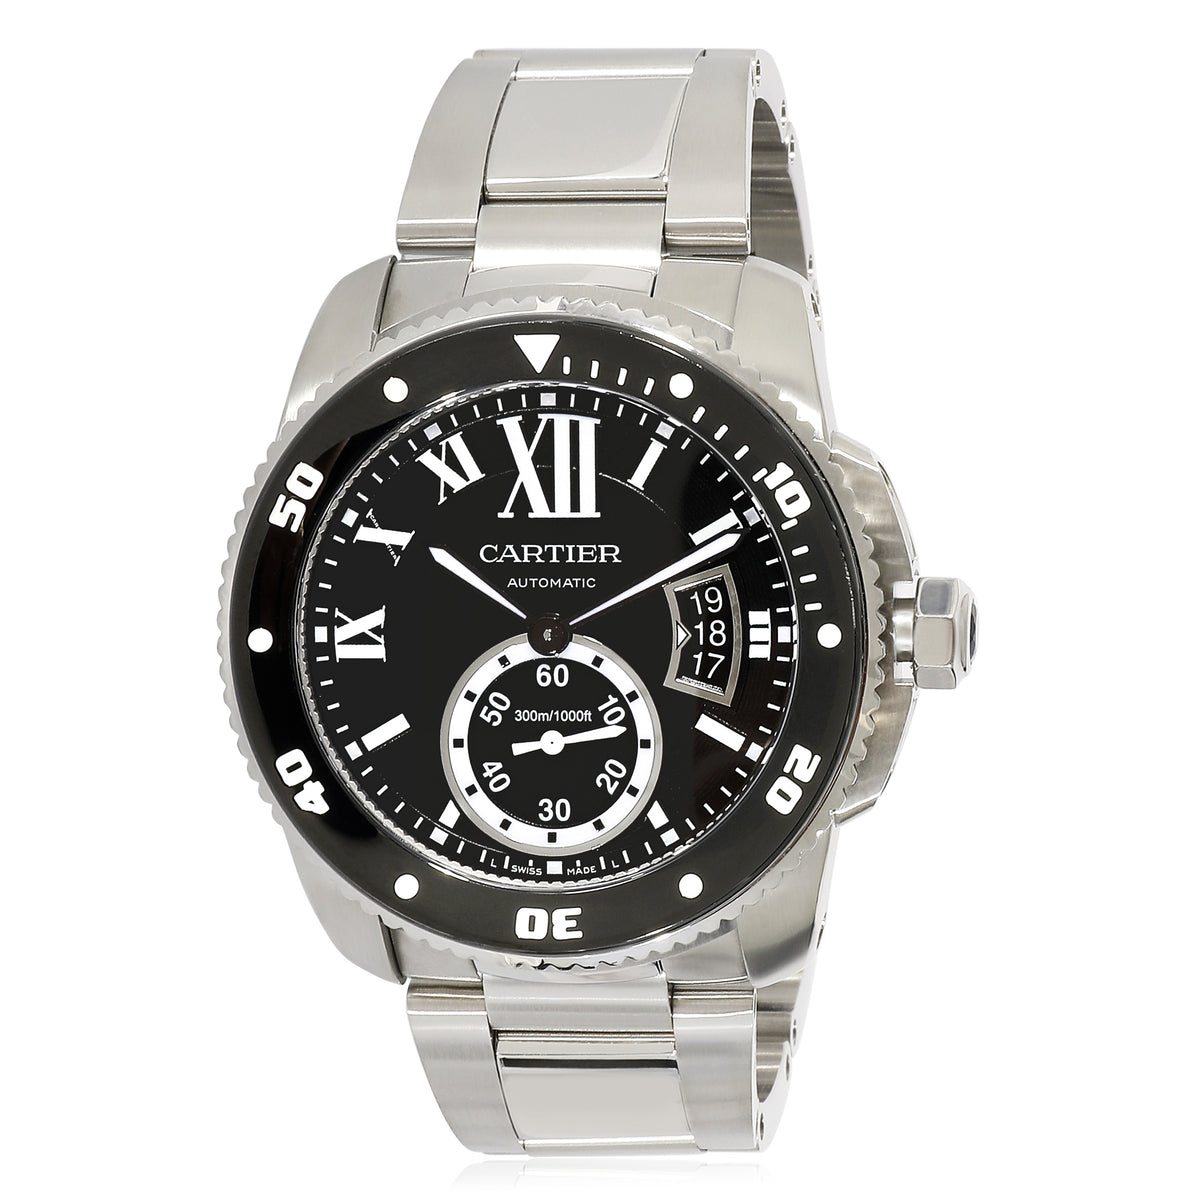 Cartier Caibre Diver W7100057 Men's Watch in  Stainless Steel